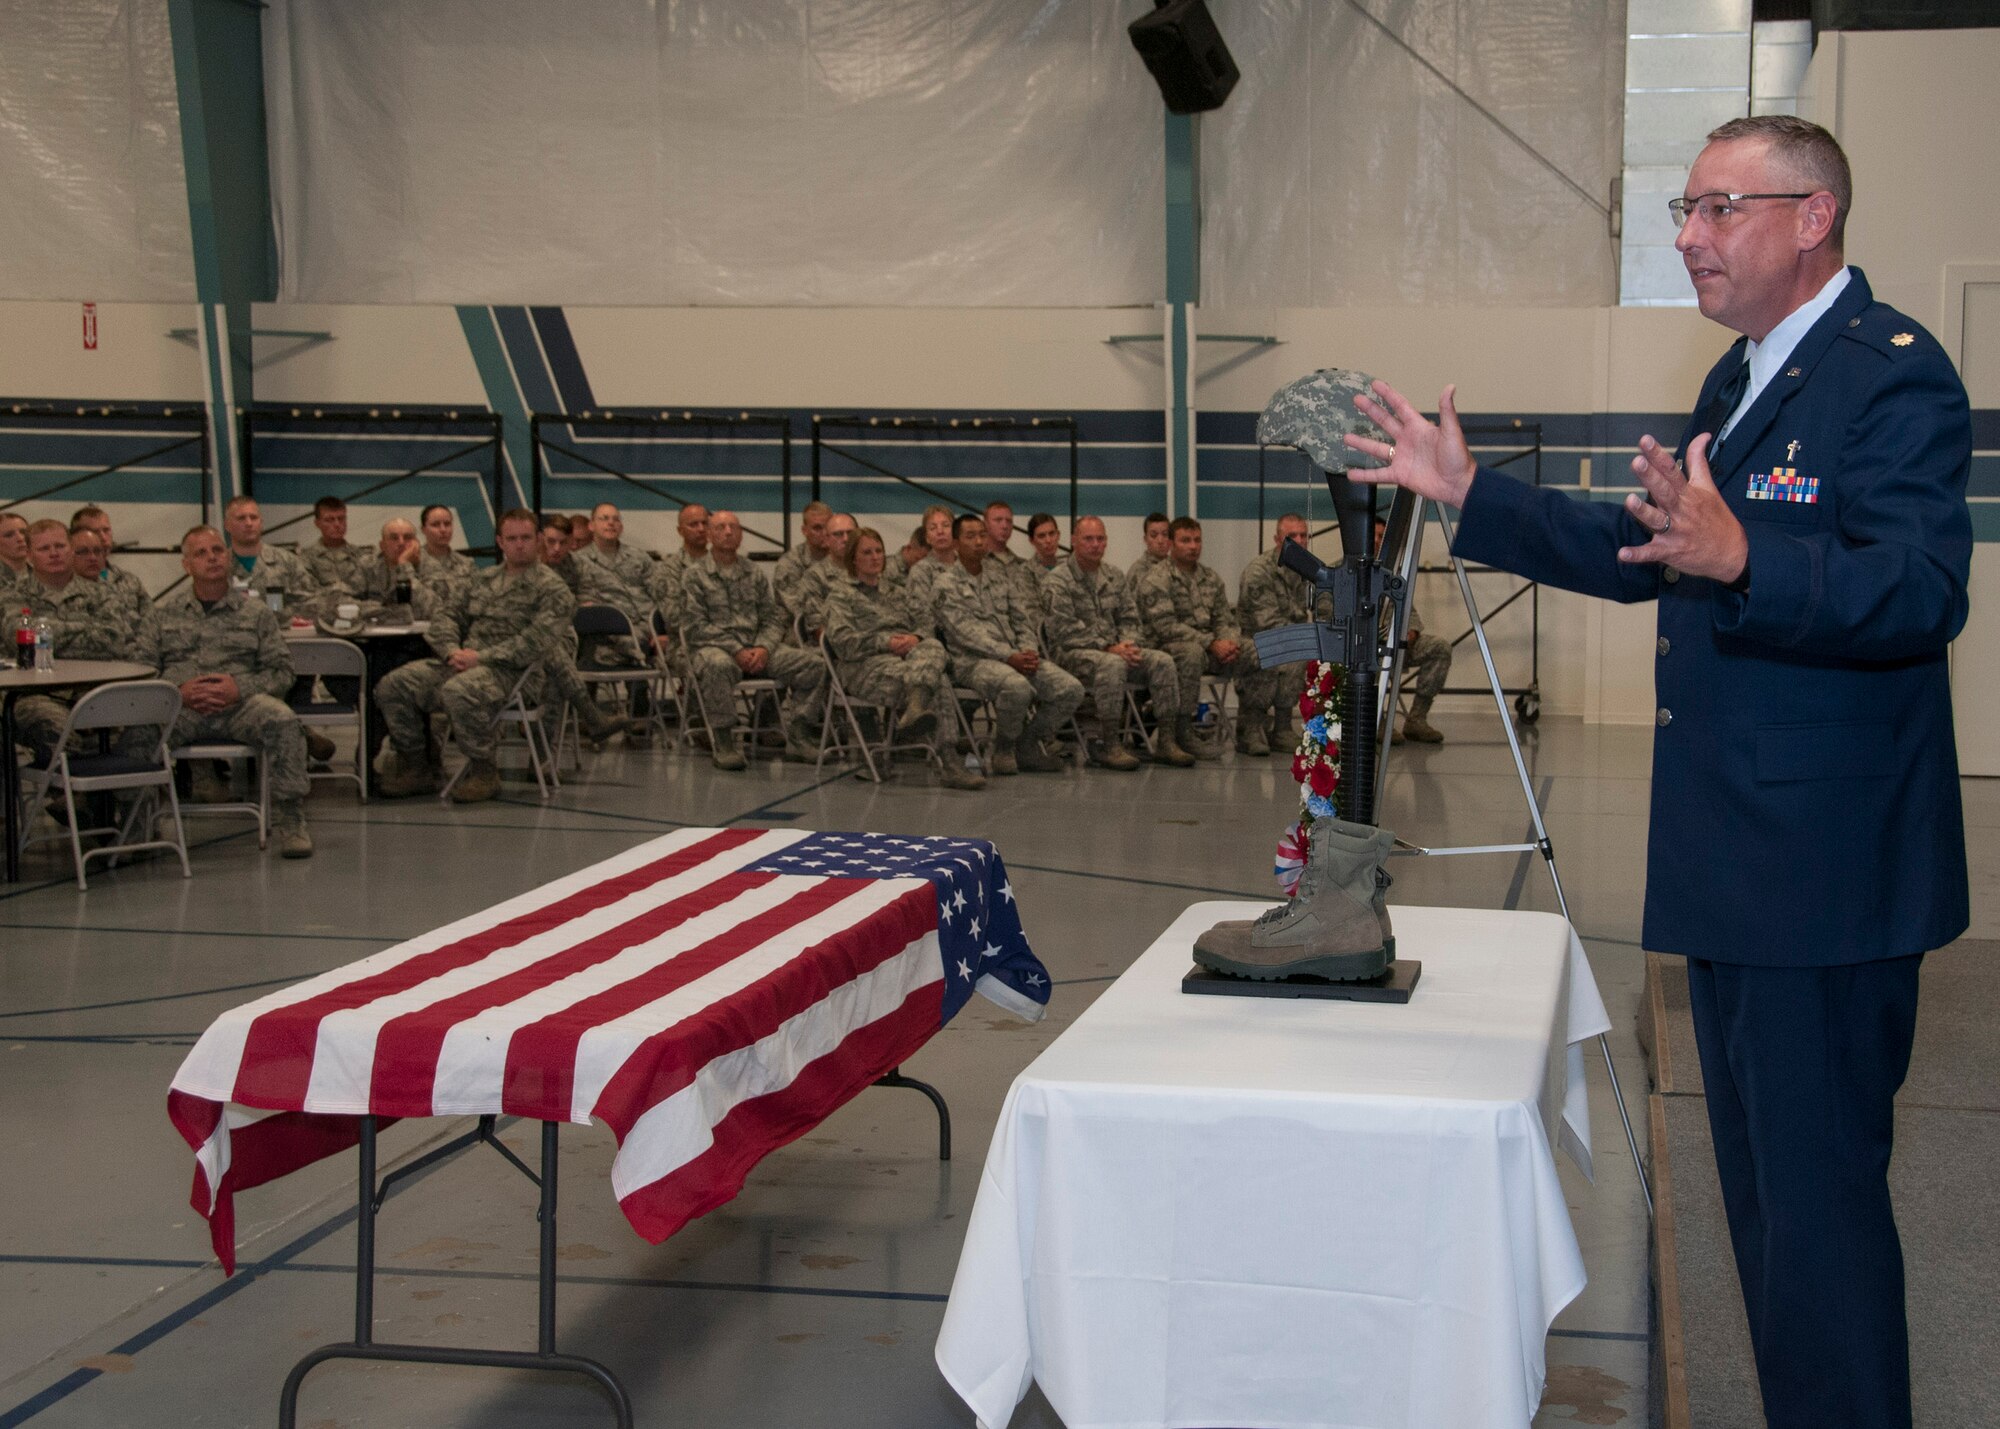 Maj. Steve Peters, a chaplain with the 185th Air Refueling Wing, preaches to members of the 185th ARW during a memorial service for Senior Airman Drew Bellairs in Sgt. Bluff, Iowa on August 1, 2015. The memorial service honored Bellairs who passed away on July 25, 2015. (U.S. Air National Guard Photo by: Tech Sgt. Oscar Sanchez/185th ARW Wing Public Affairs Released)